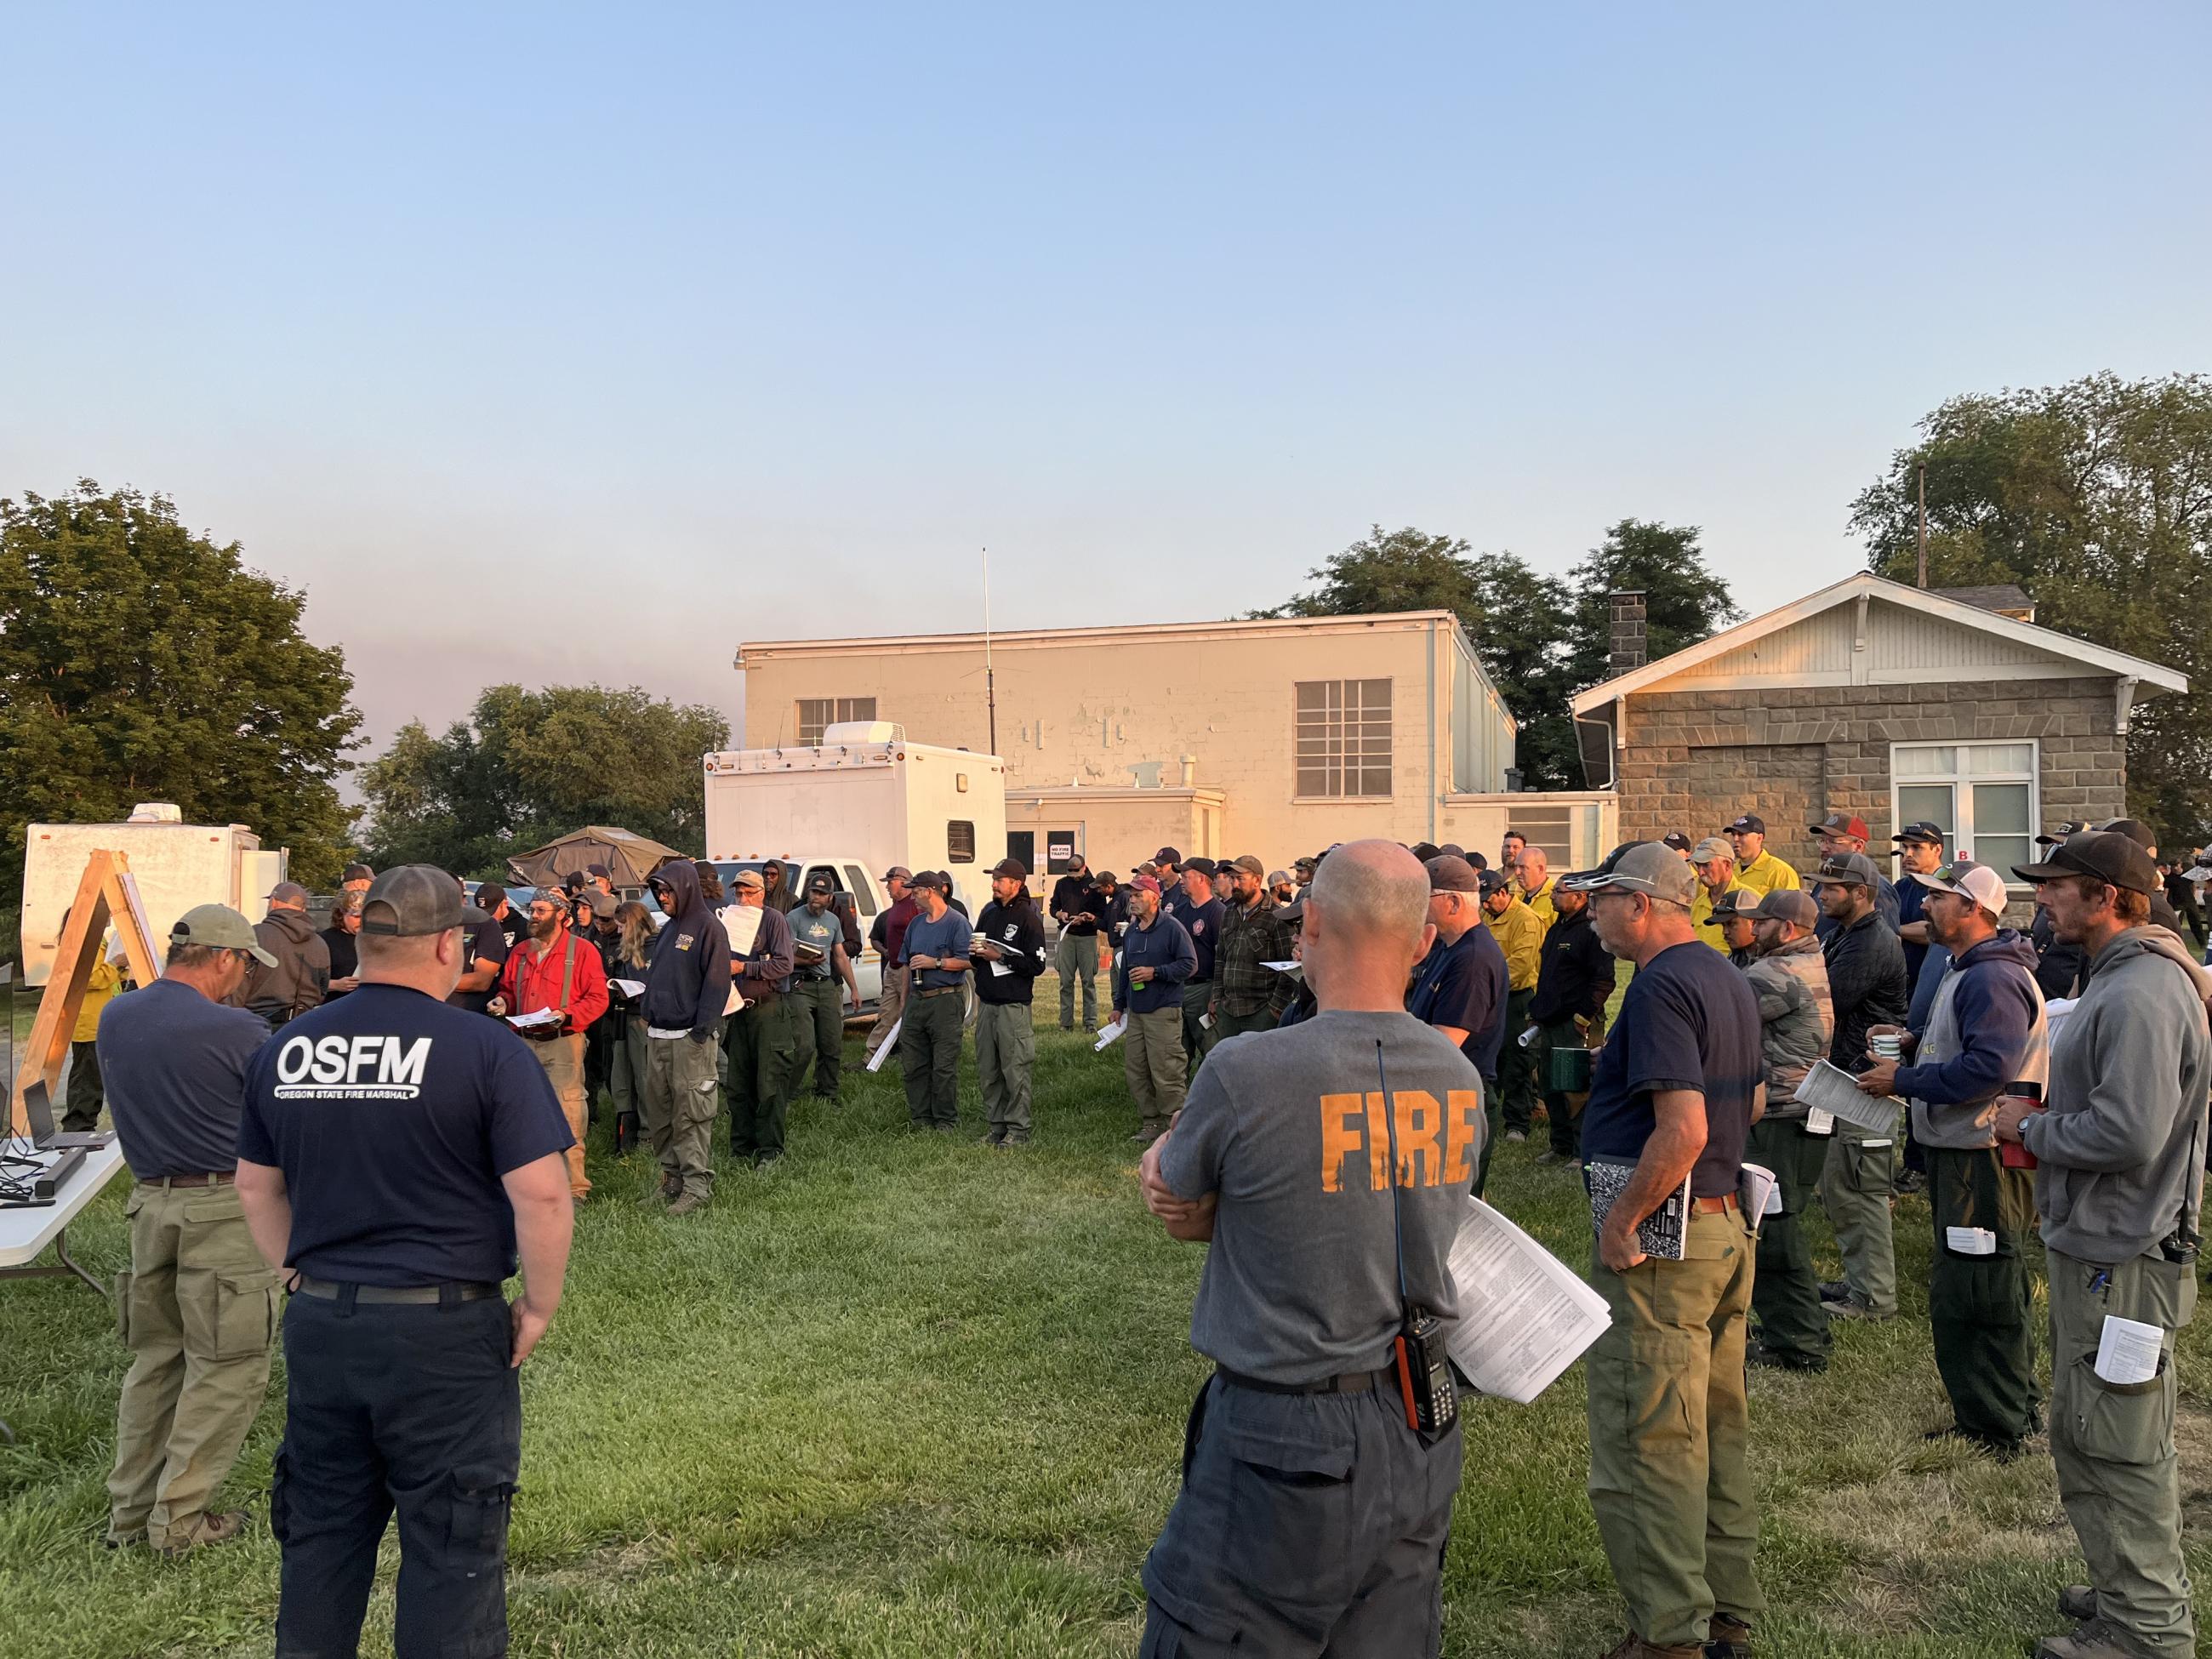 Firefighters attend morning briefing in Durkee, OR. Photo by Alexa Valladolid, NW Team 6